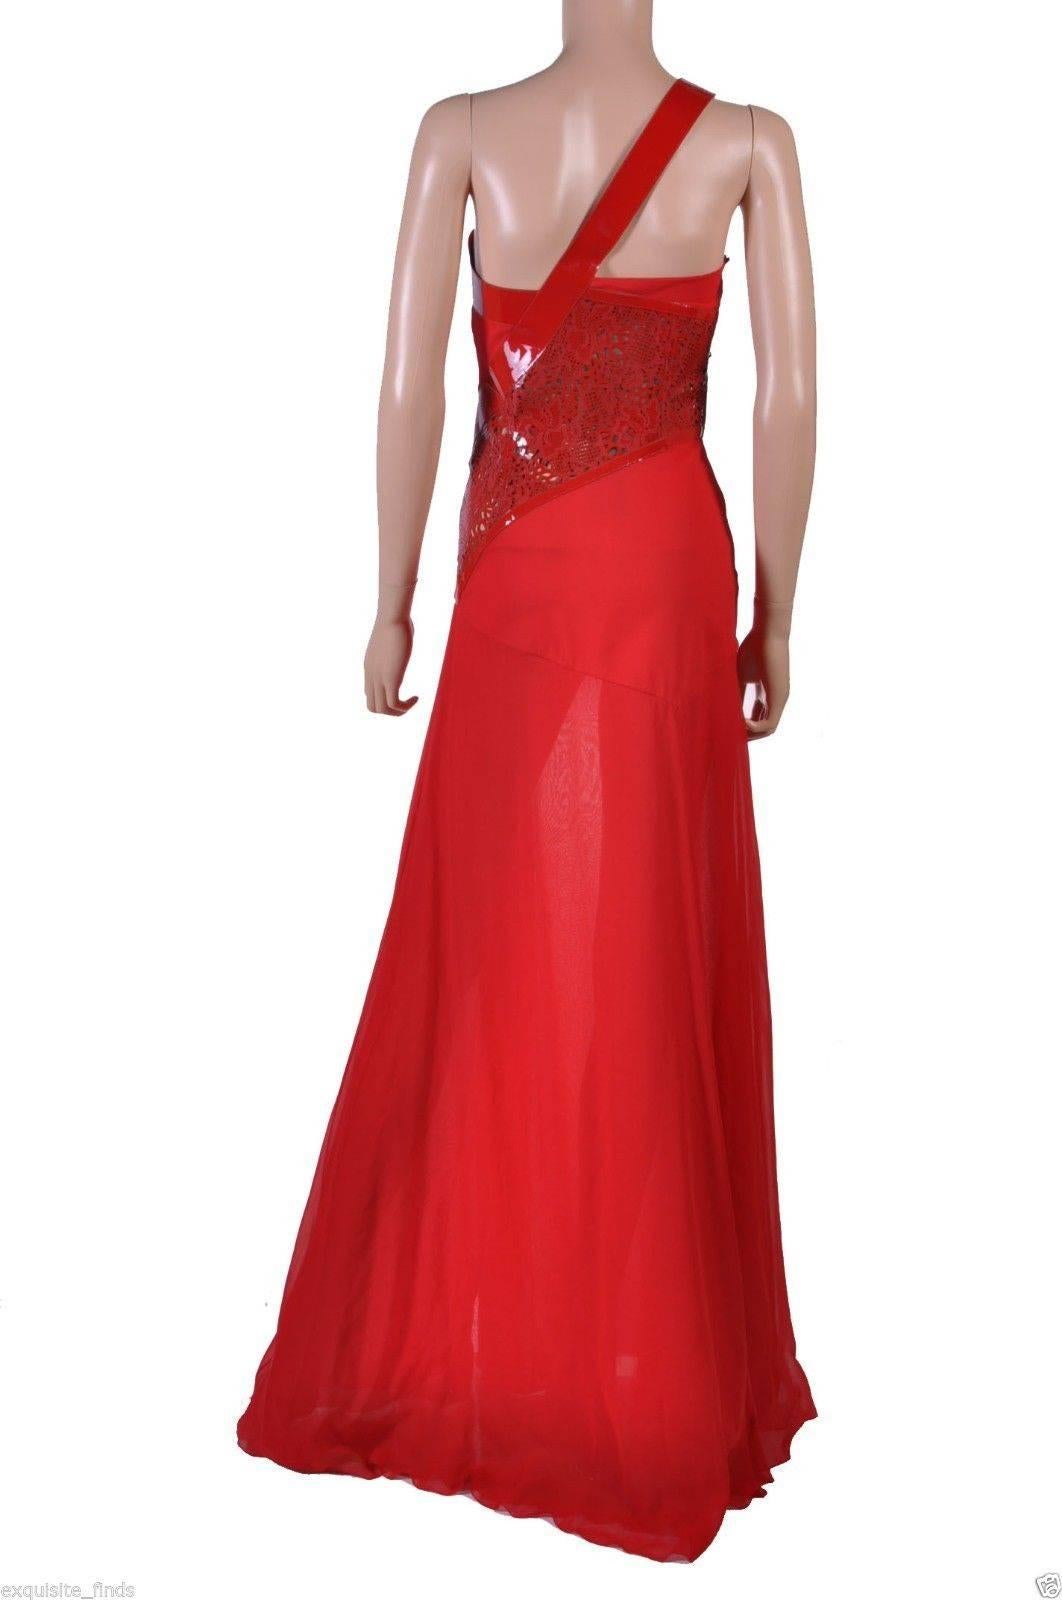 Women's Versace Red Silk Chiffon Gown Dress with Patent Leather 